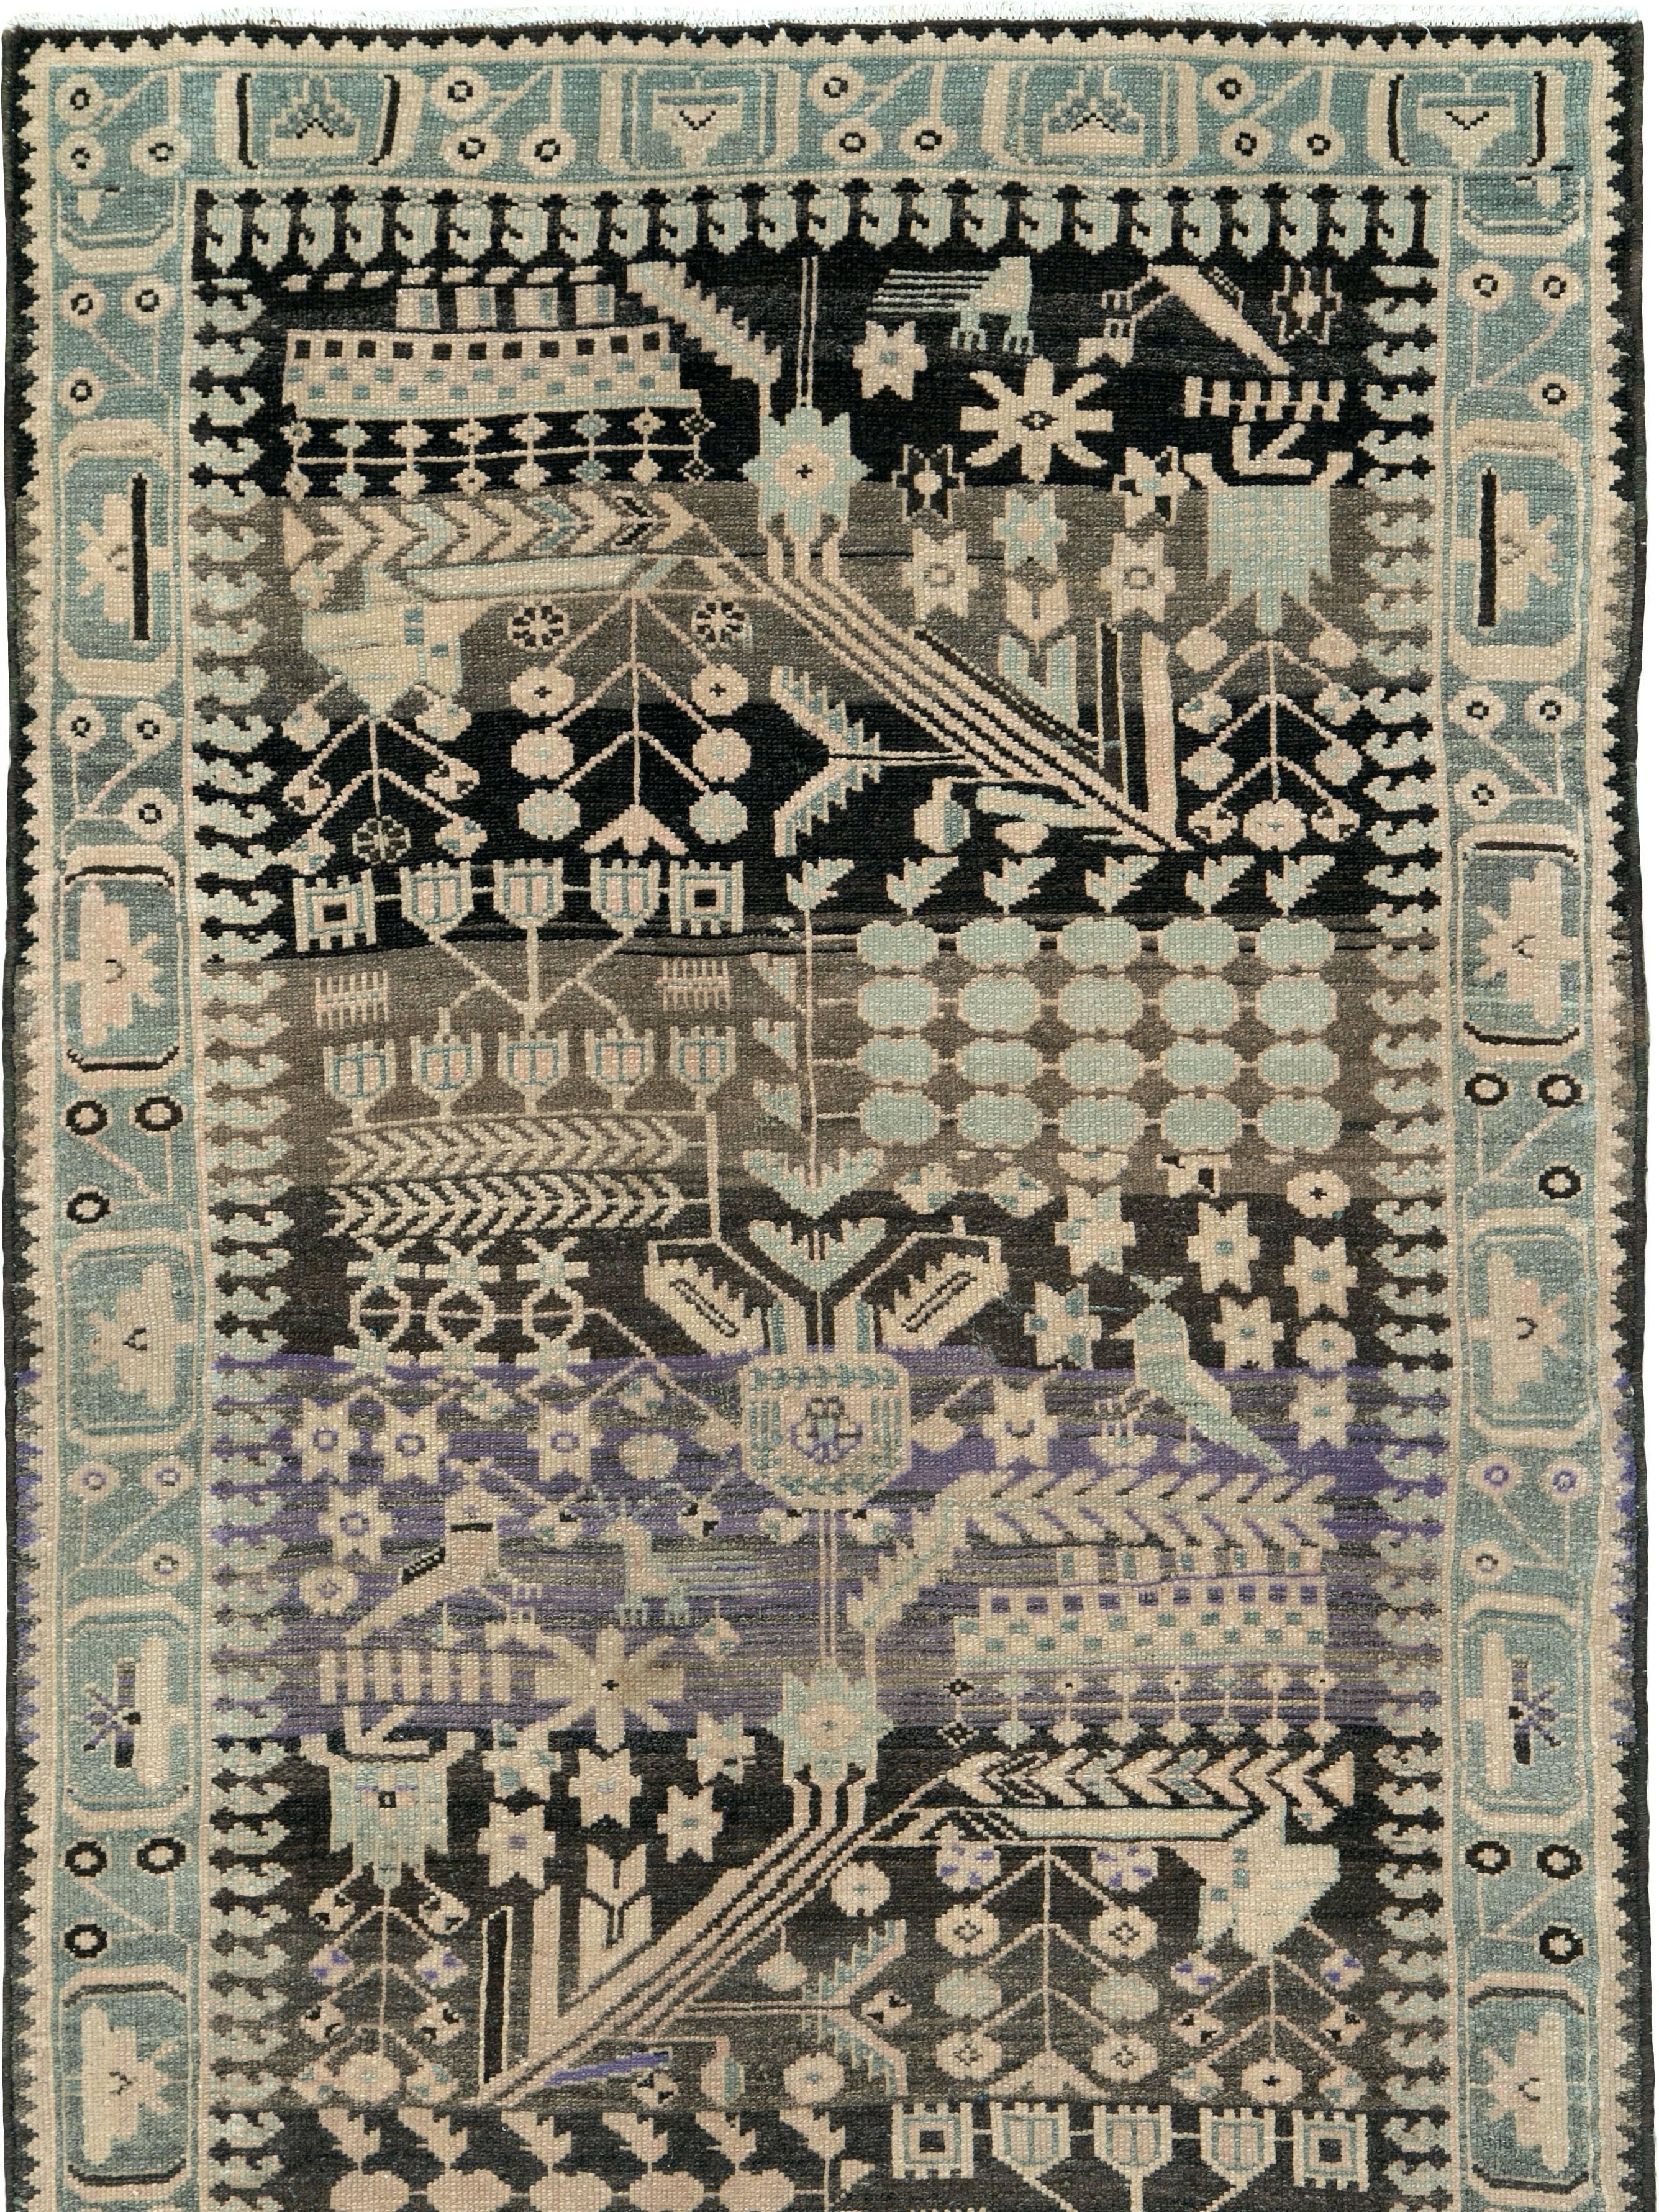 A vintage Persian Malayer runner from the mid-20th century.

Measures: 3' 8